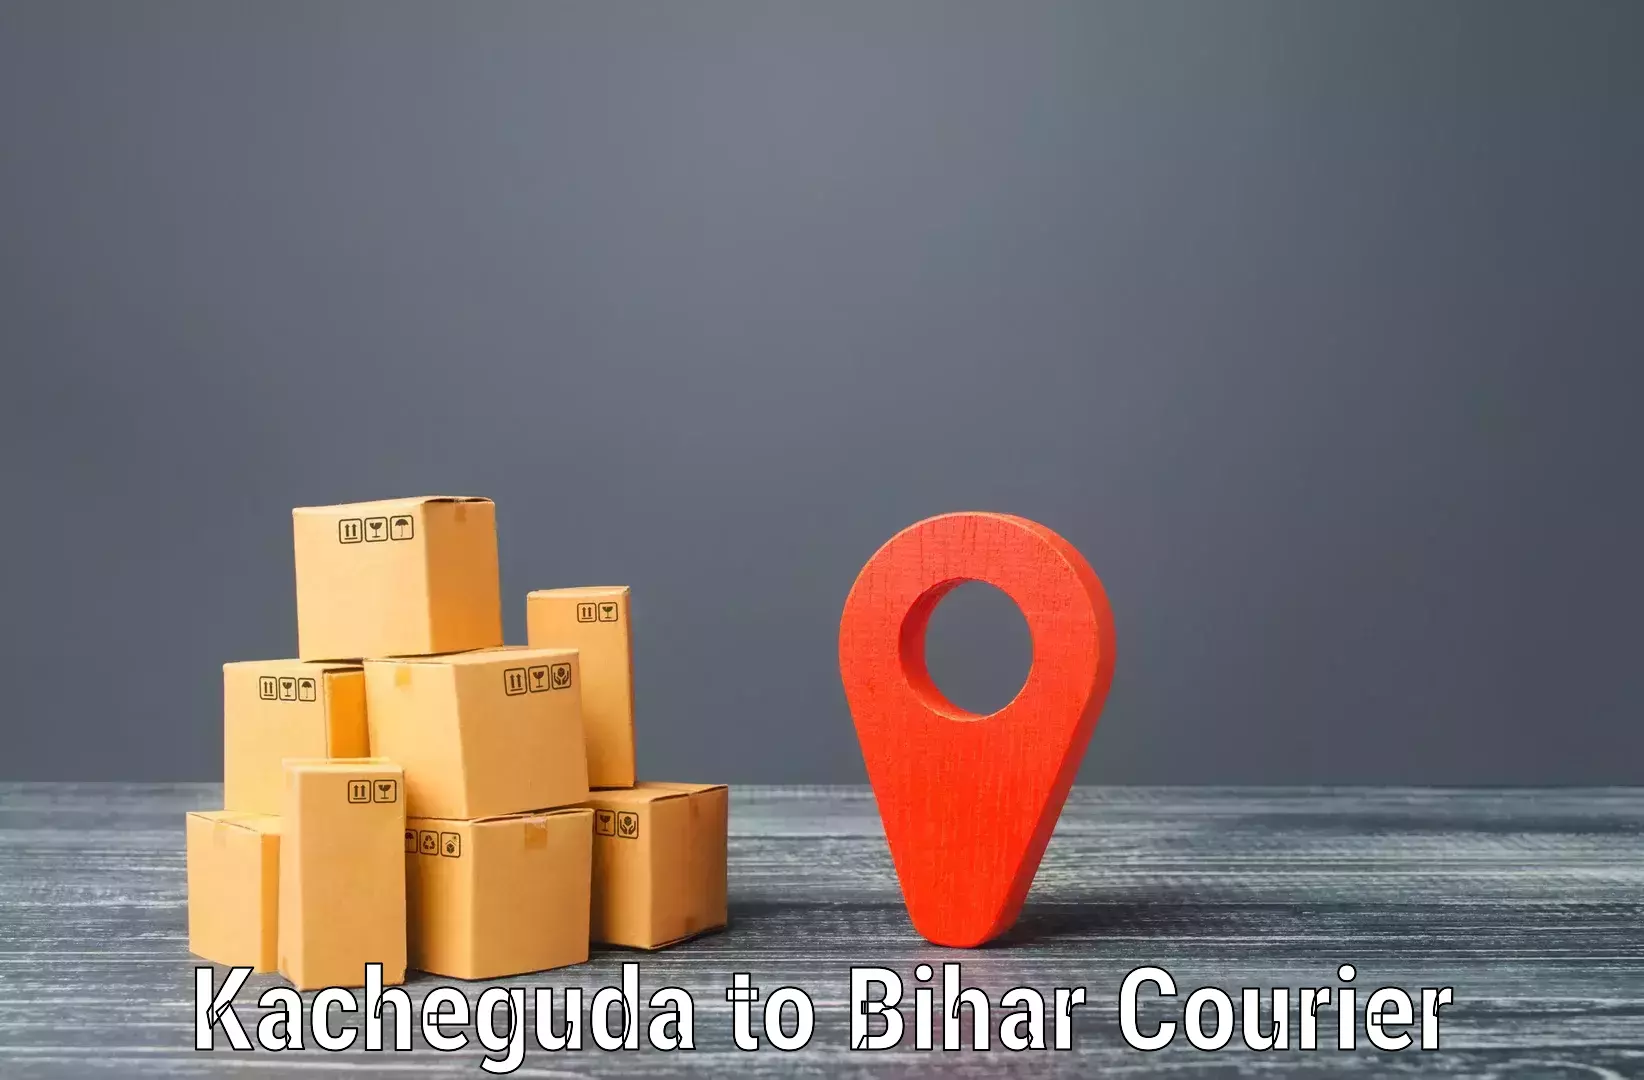 State-of-the-art courier technology Kacheguda to Palasi Araria